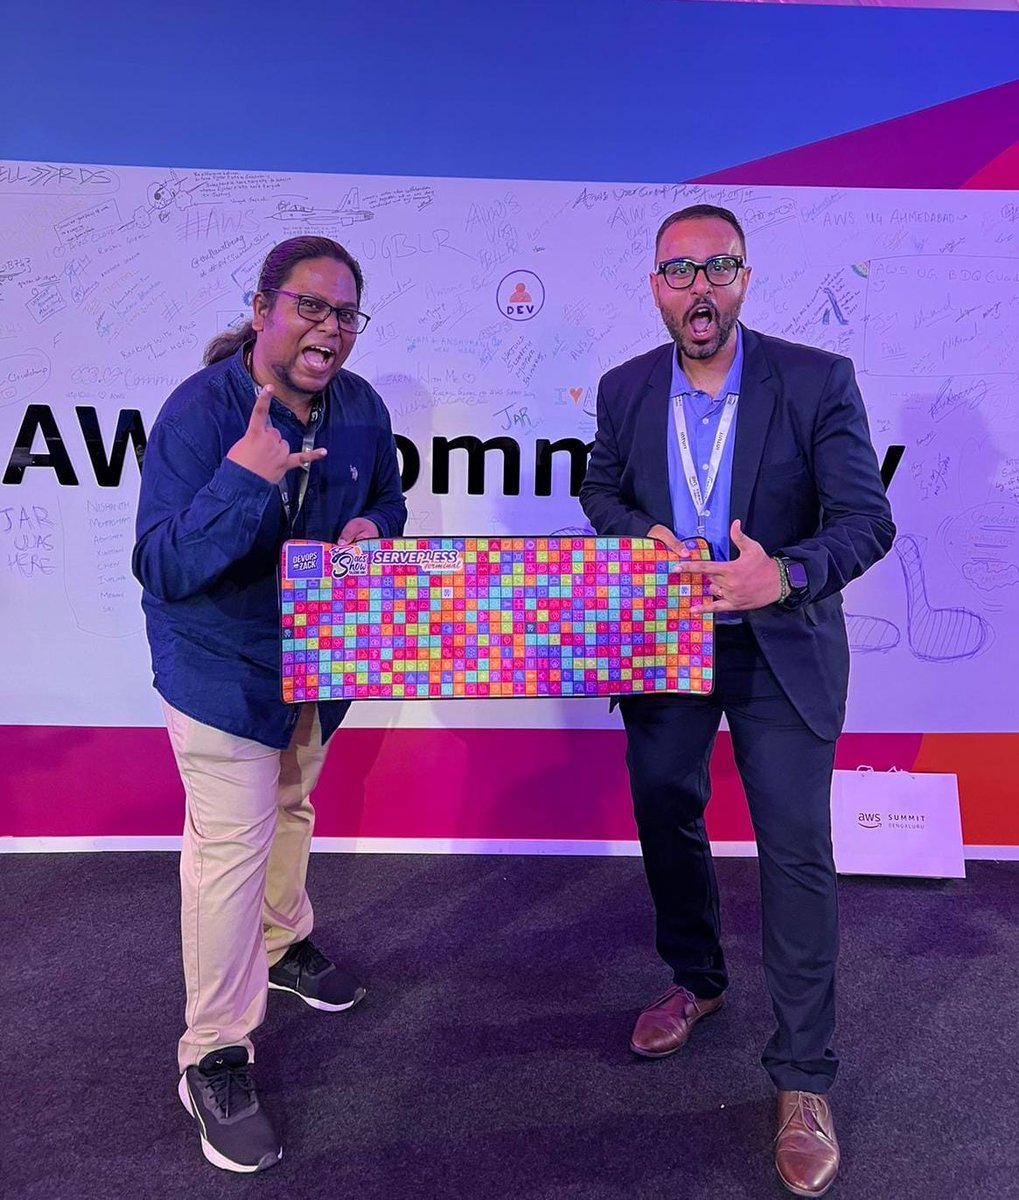 Surprised to receive a fully customized AWS Cloud gaming mouse pad at the AWS Summit by  @zachjonesnoel  our very own AWS Serverless Hero!

I think it's incredibly designed and looks absolutely outstanding. What do you think? I'd love to hear your thoughts—let me know in the